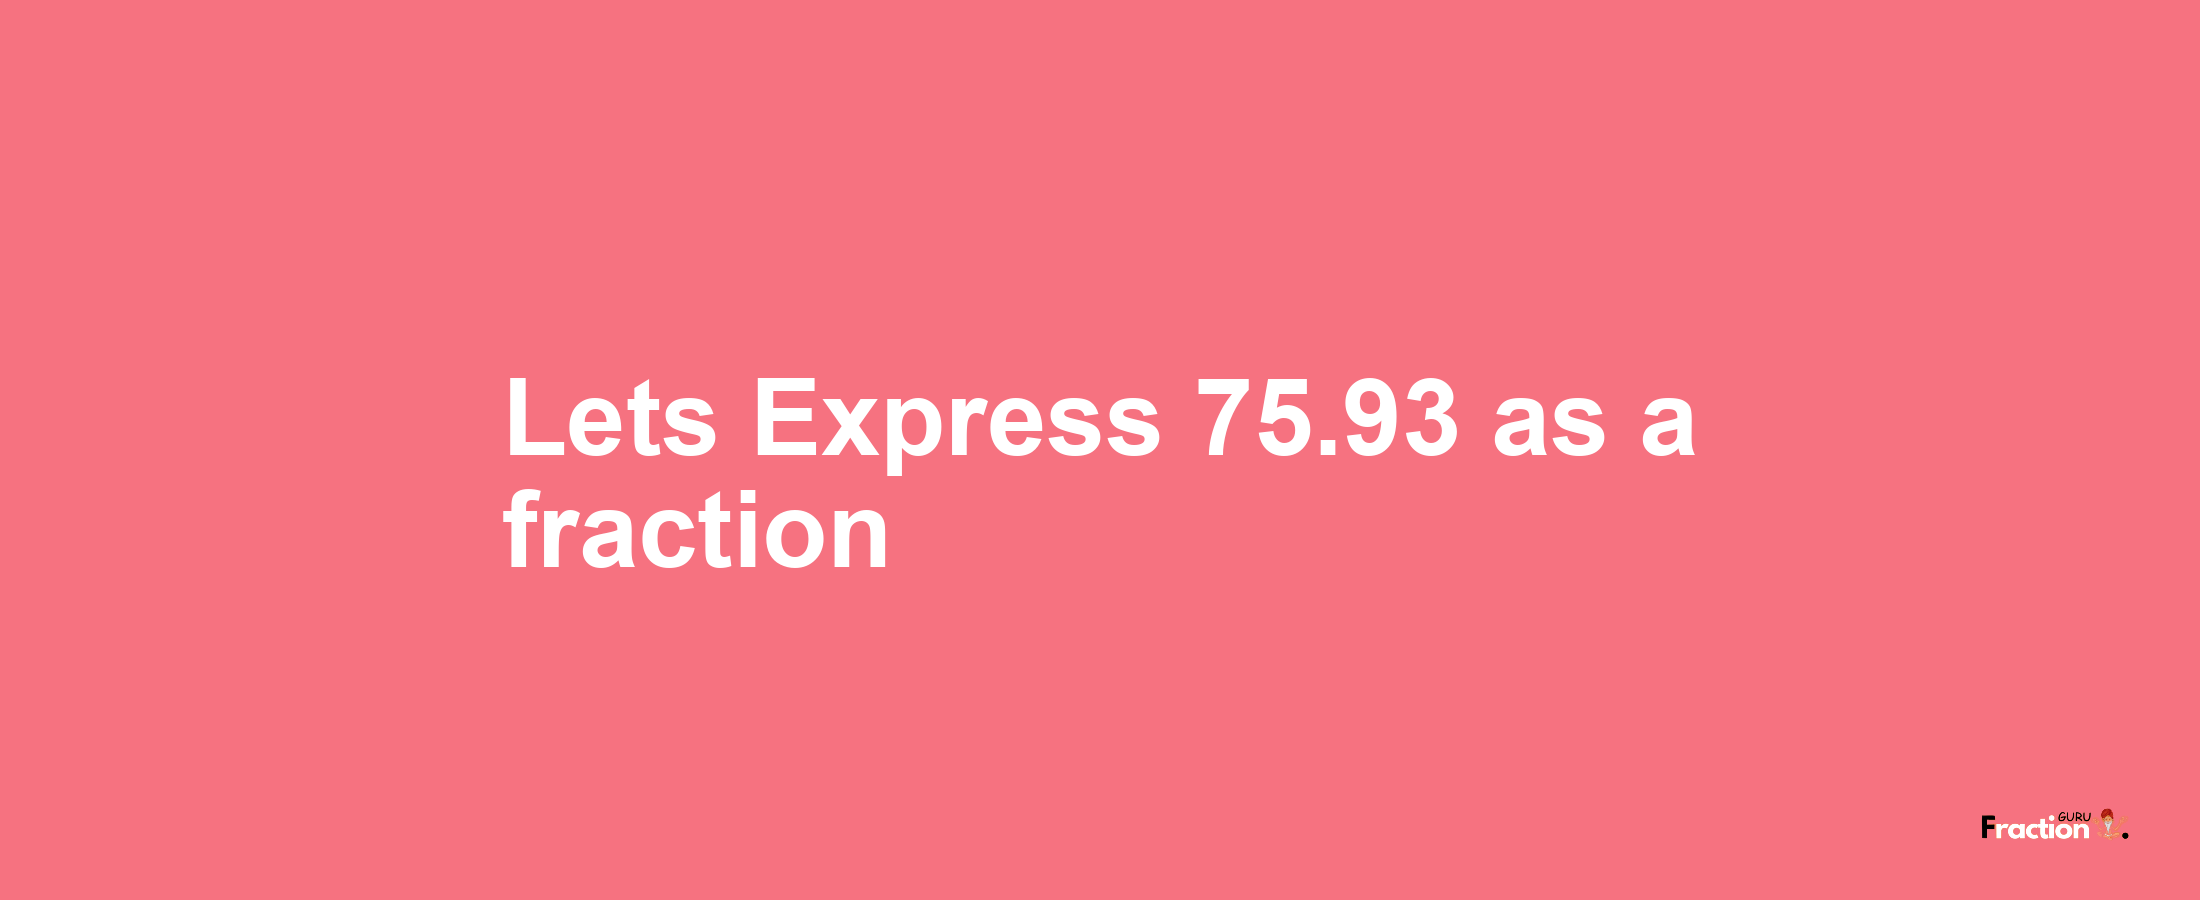 Lets Express 75.93 as afraction